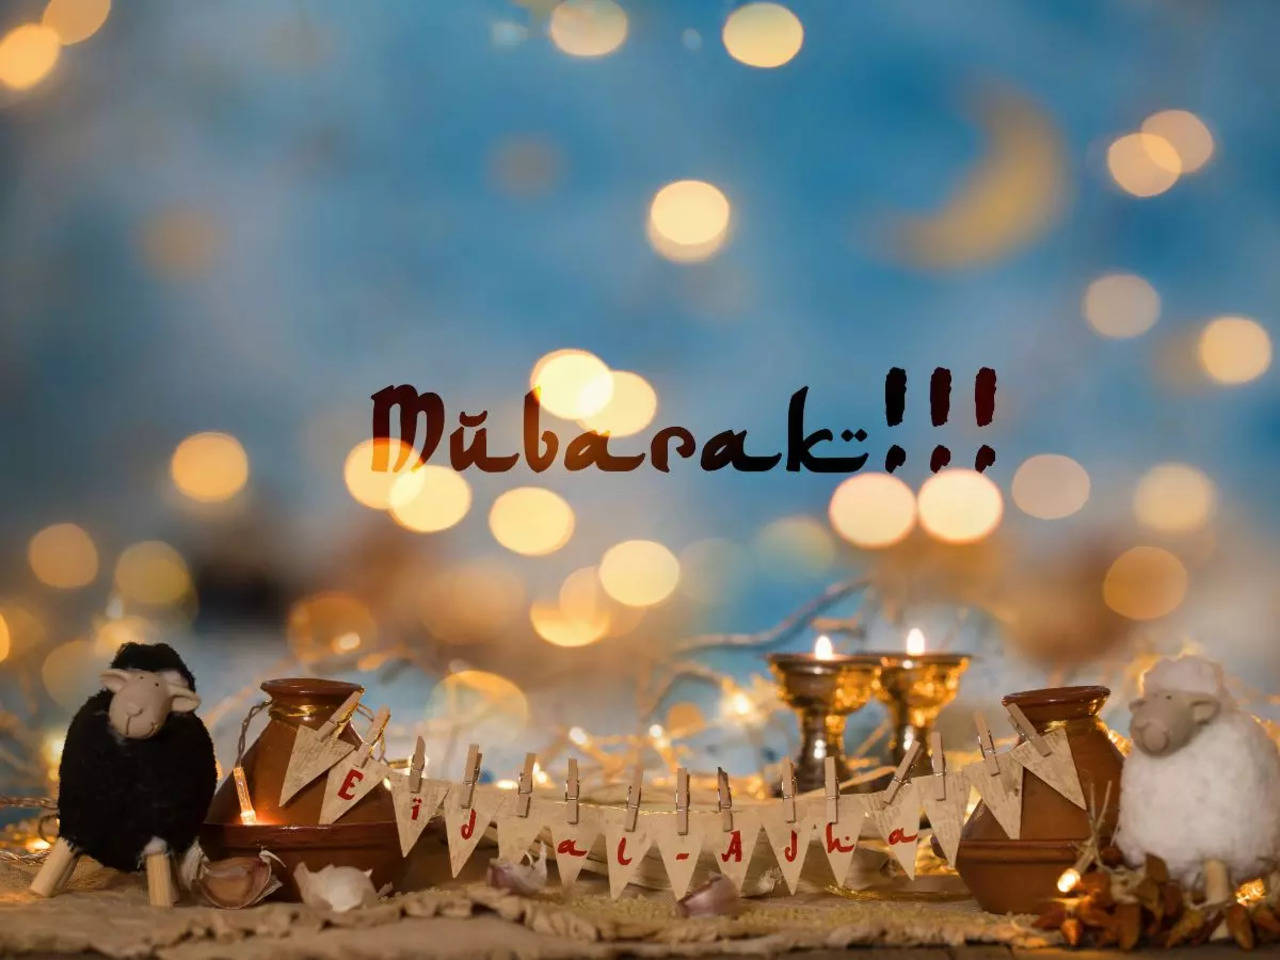 Incredible Compilation: Over 999 Mubarak Images in Stunning 4K Quality